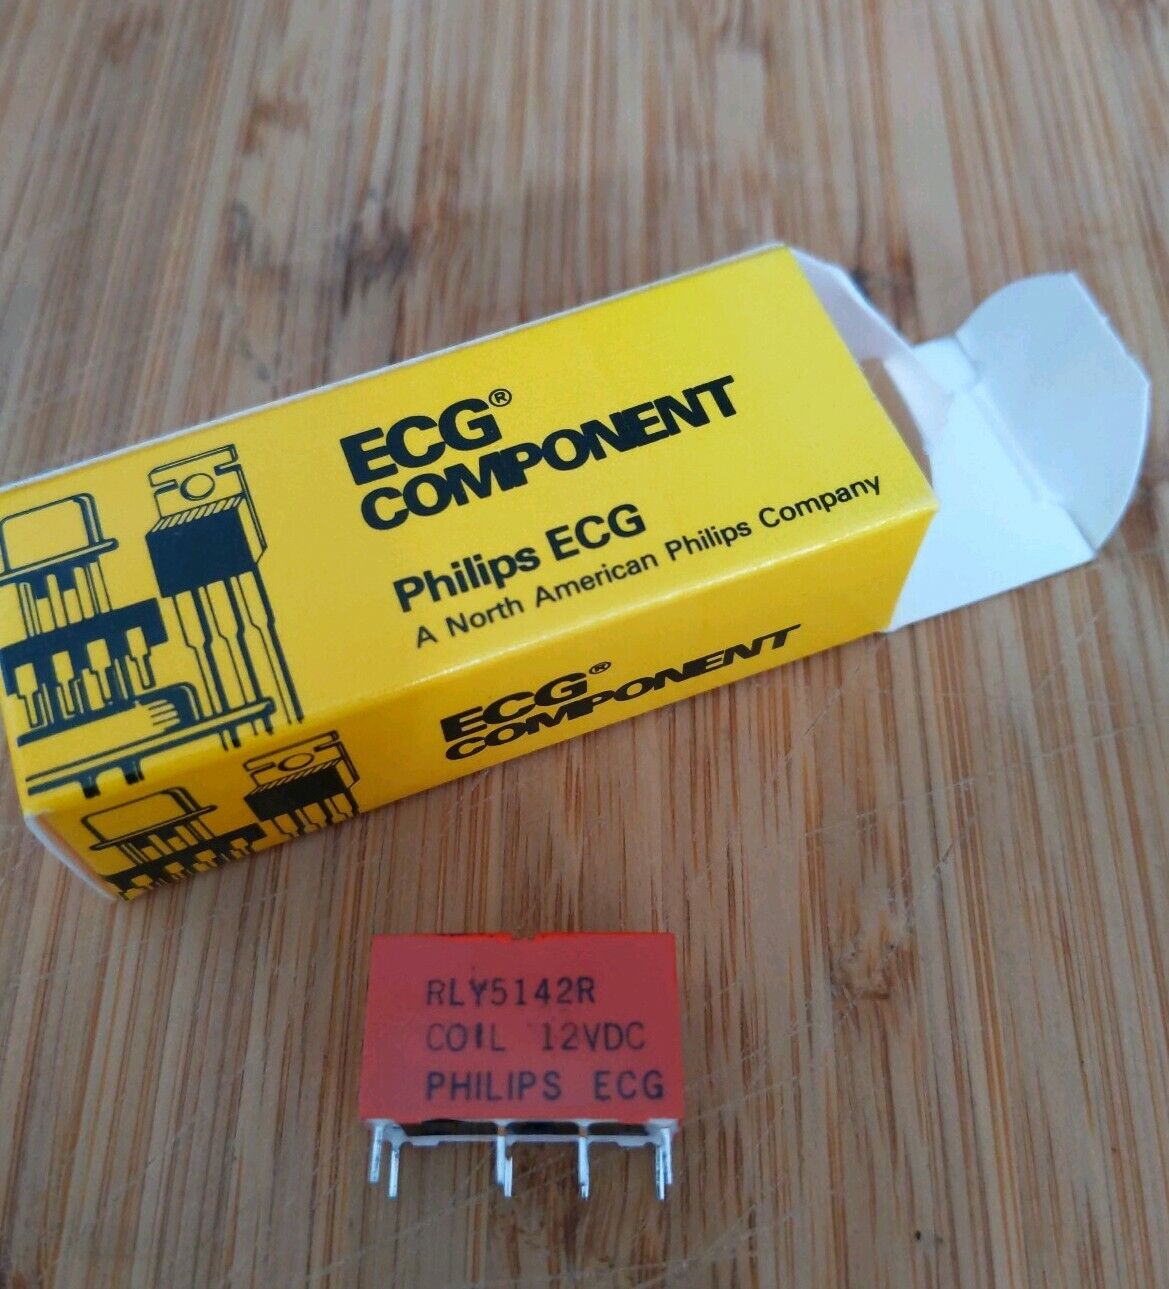 Philips ecg rly5142r dpdt  2A Coil 12 vdc Relay (BL100)